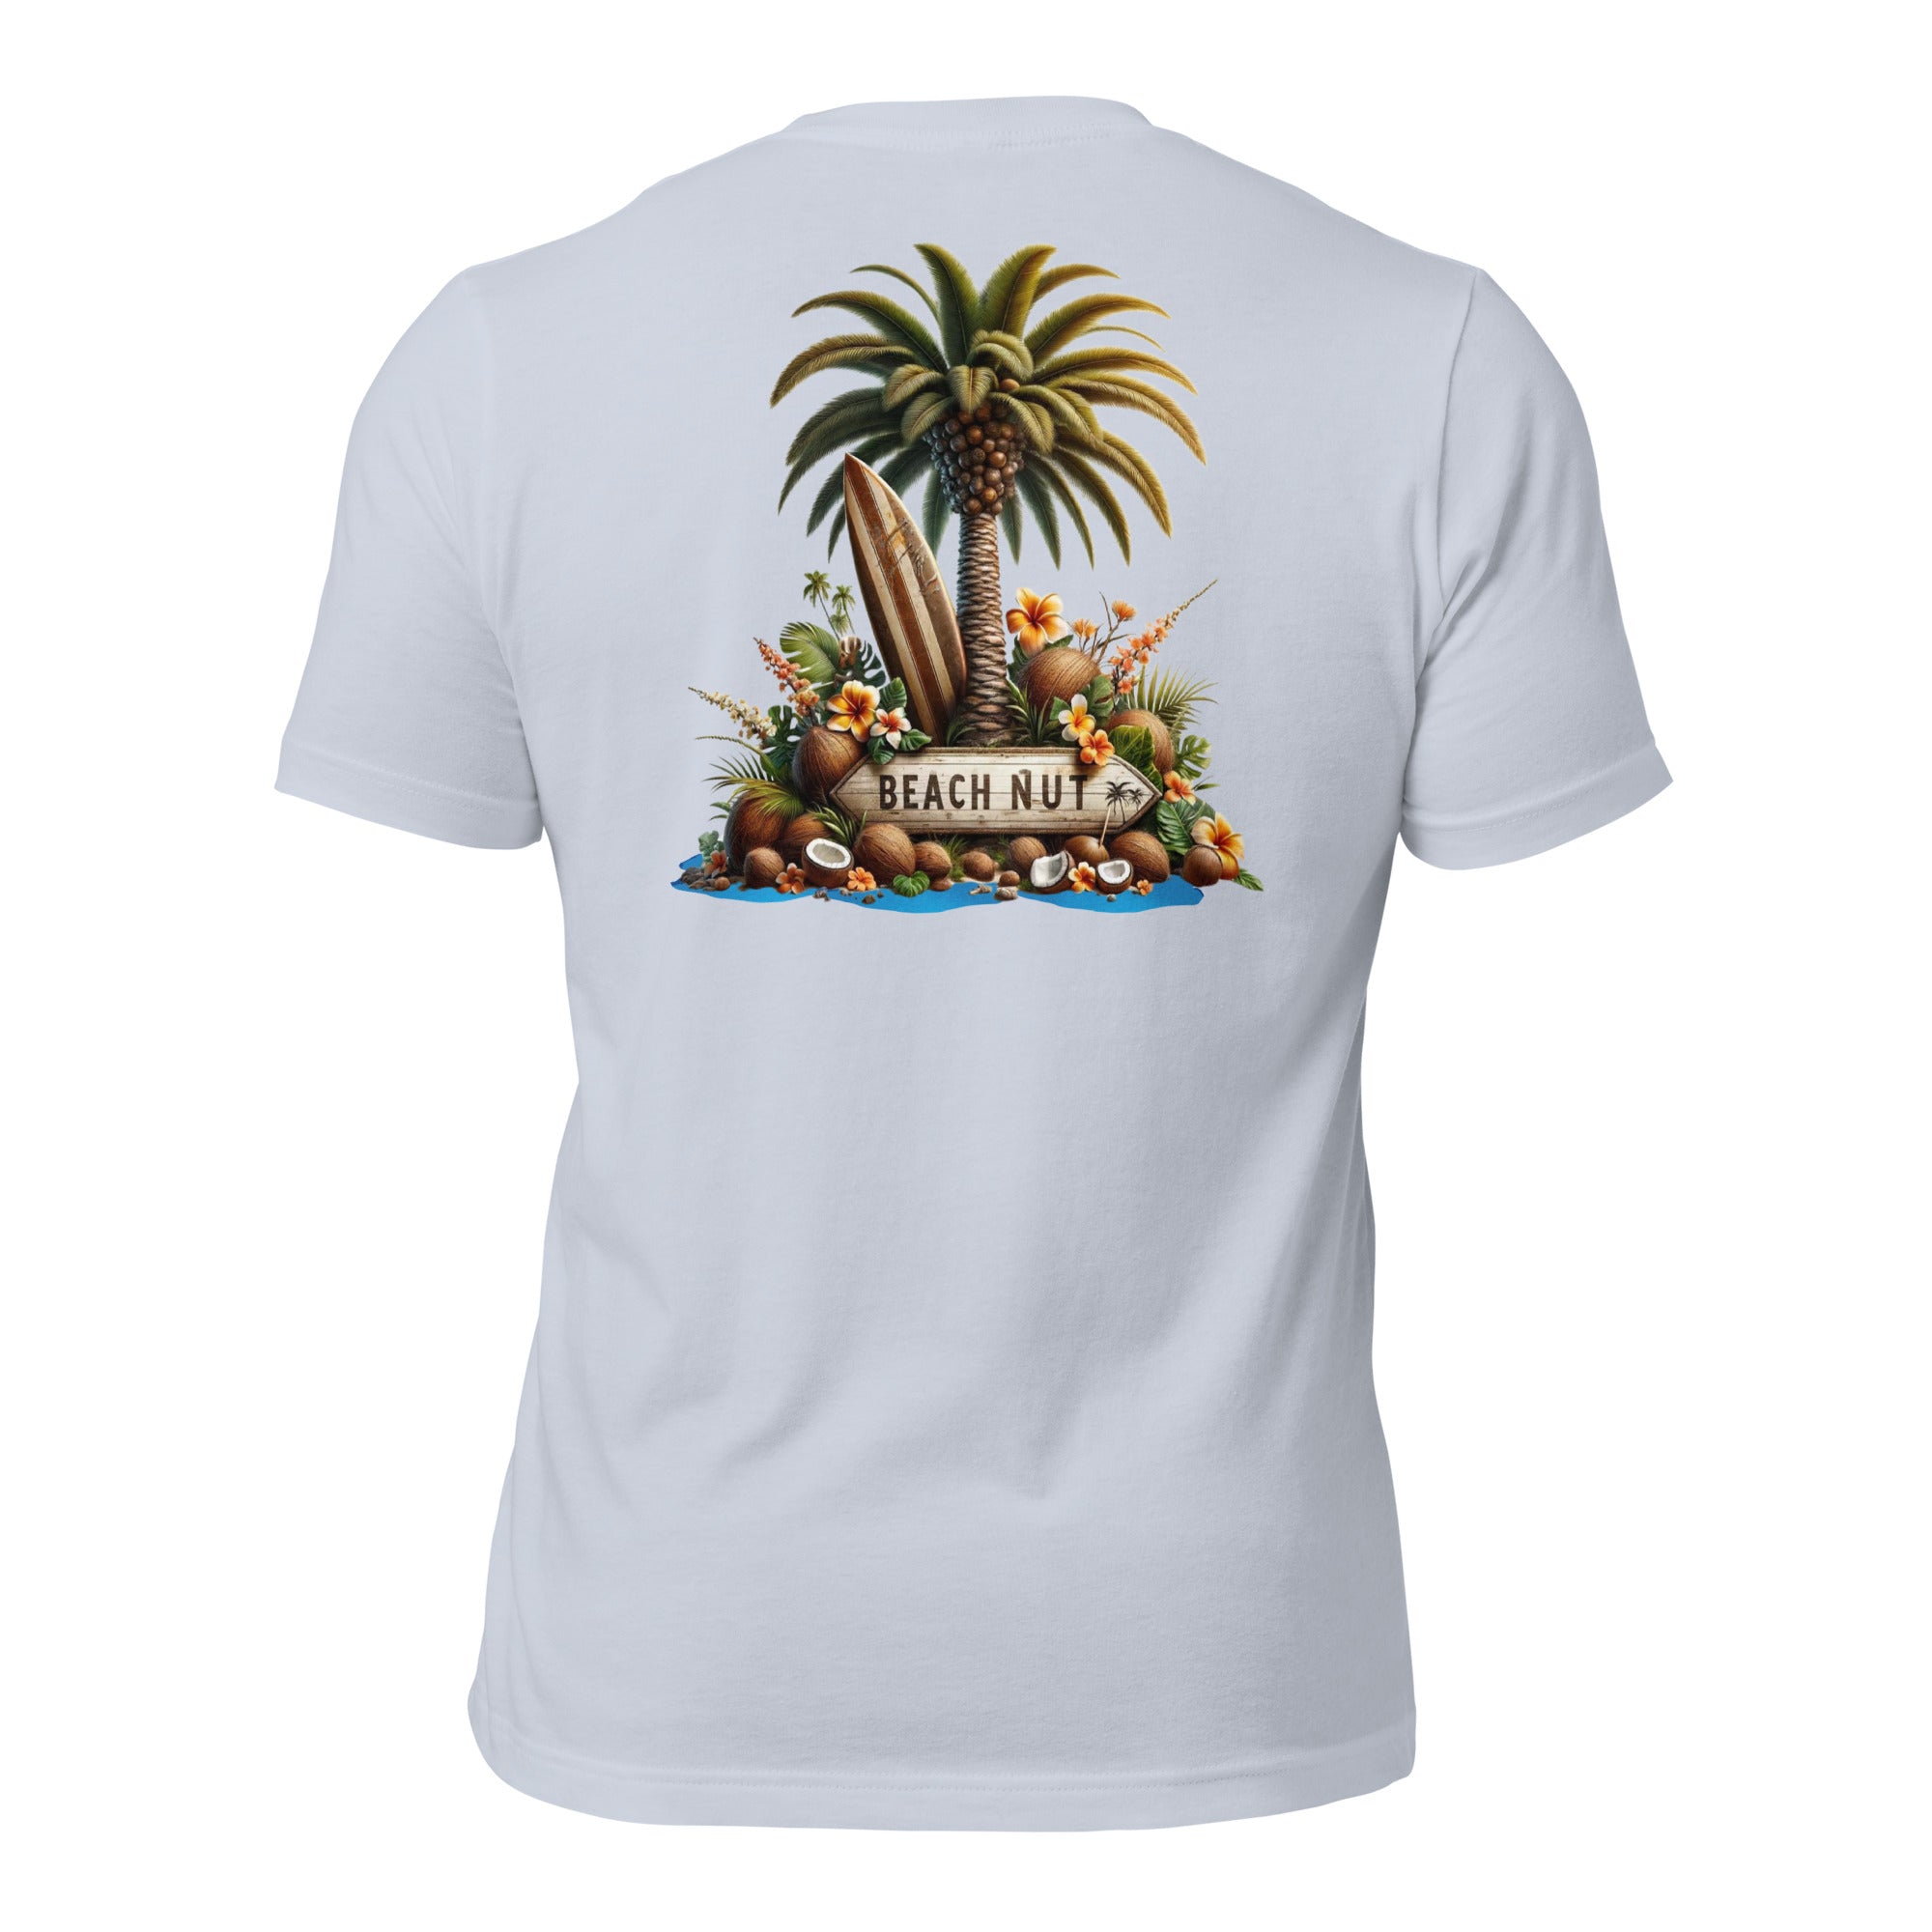 Carefree Spirit of the Tropics With Our Beach Nut T-Shirt by Lucas Islander.